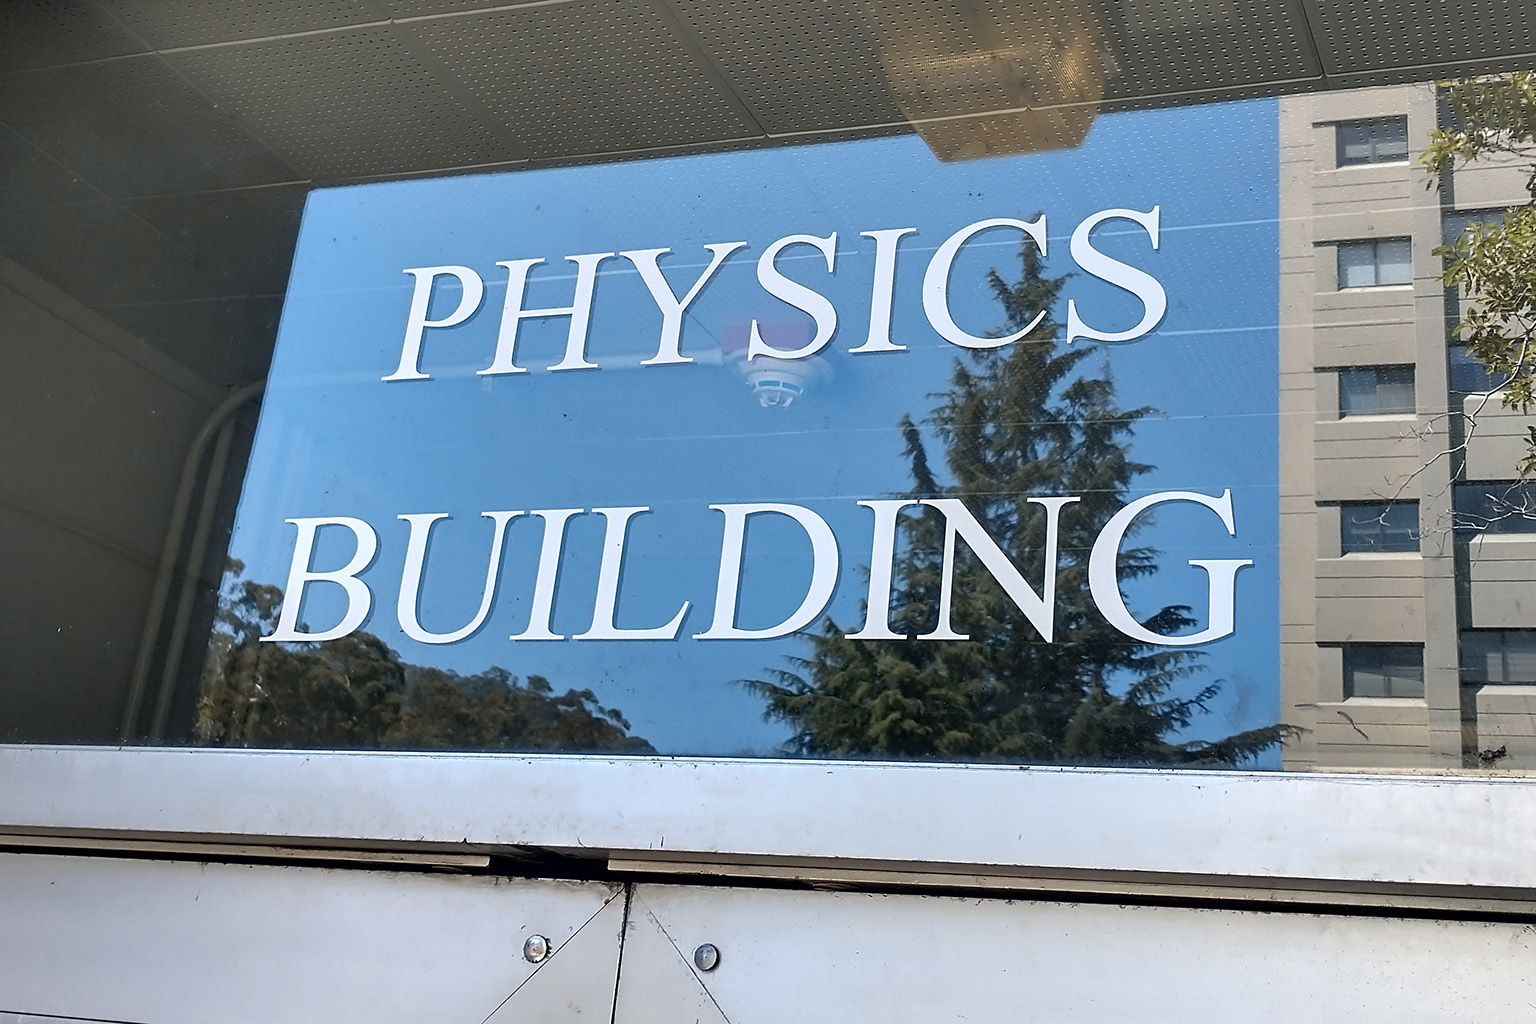 The words "PHYSICS BUILDING" are labelled on a glass window above a door.